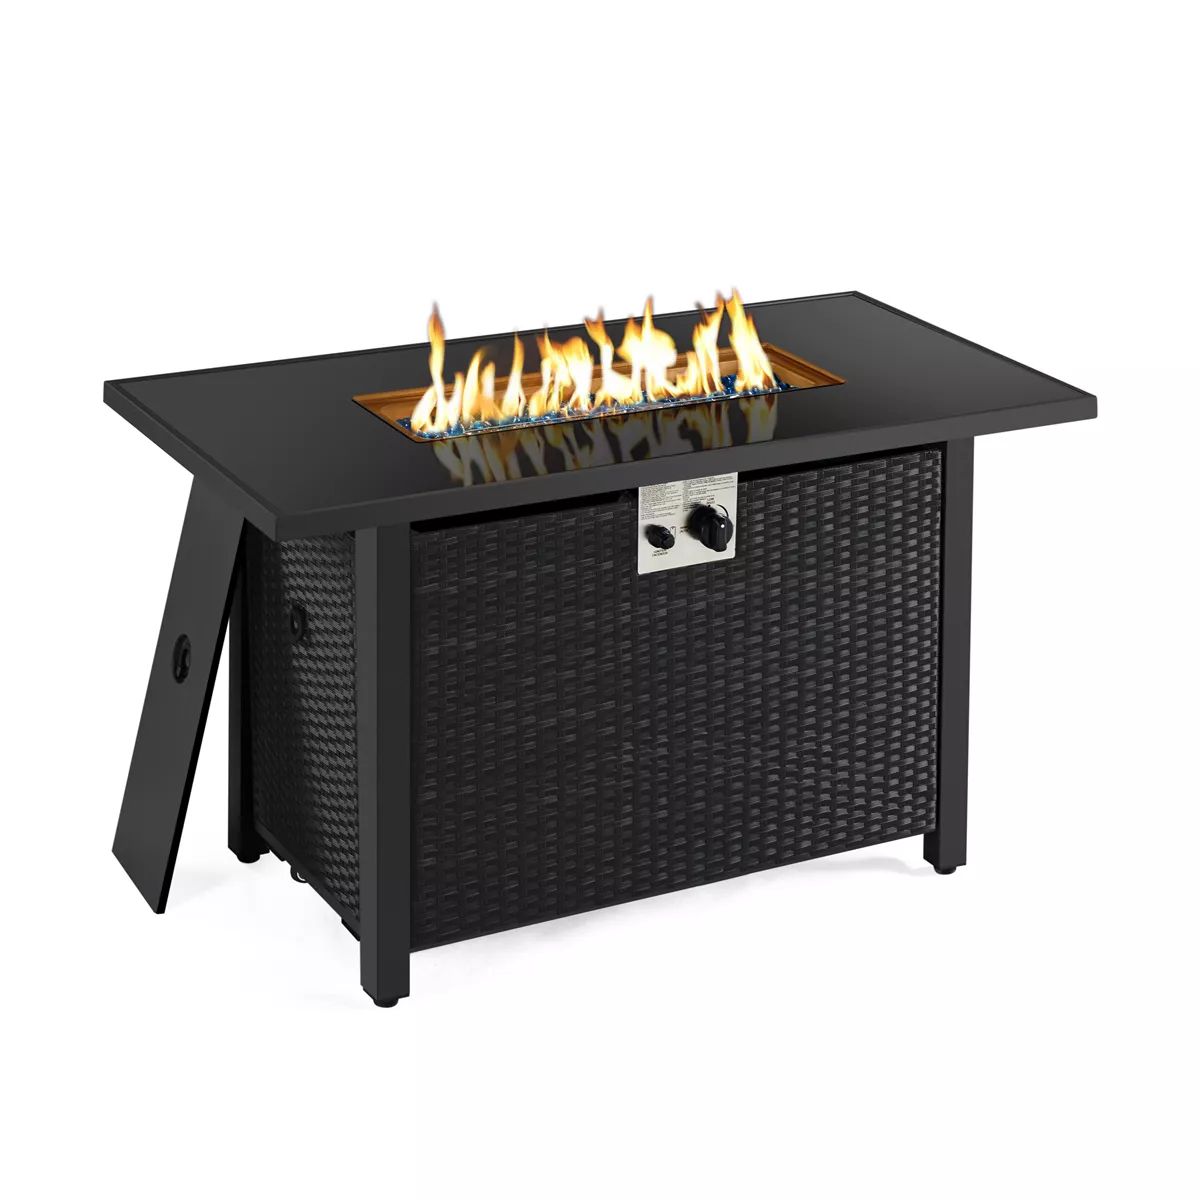 Yaheetech Outdoor Gas Fire Pit Table 43 inch with Tempered Glass Tabletop | Target